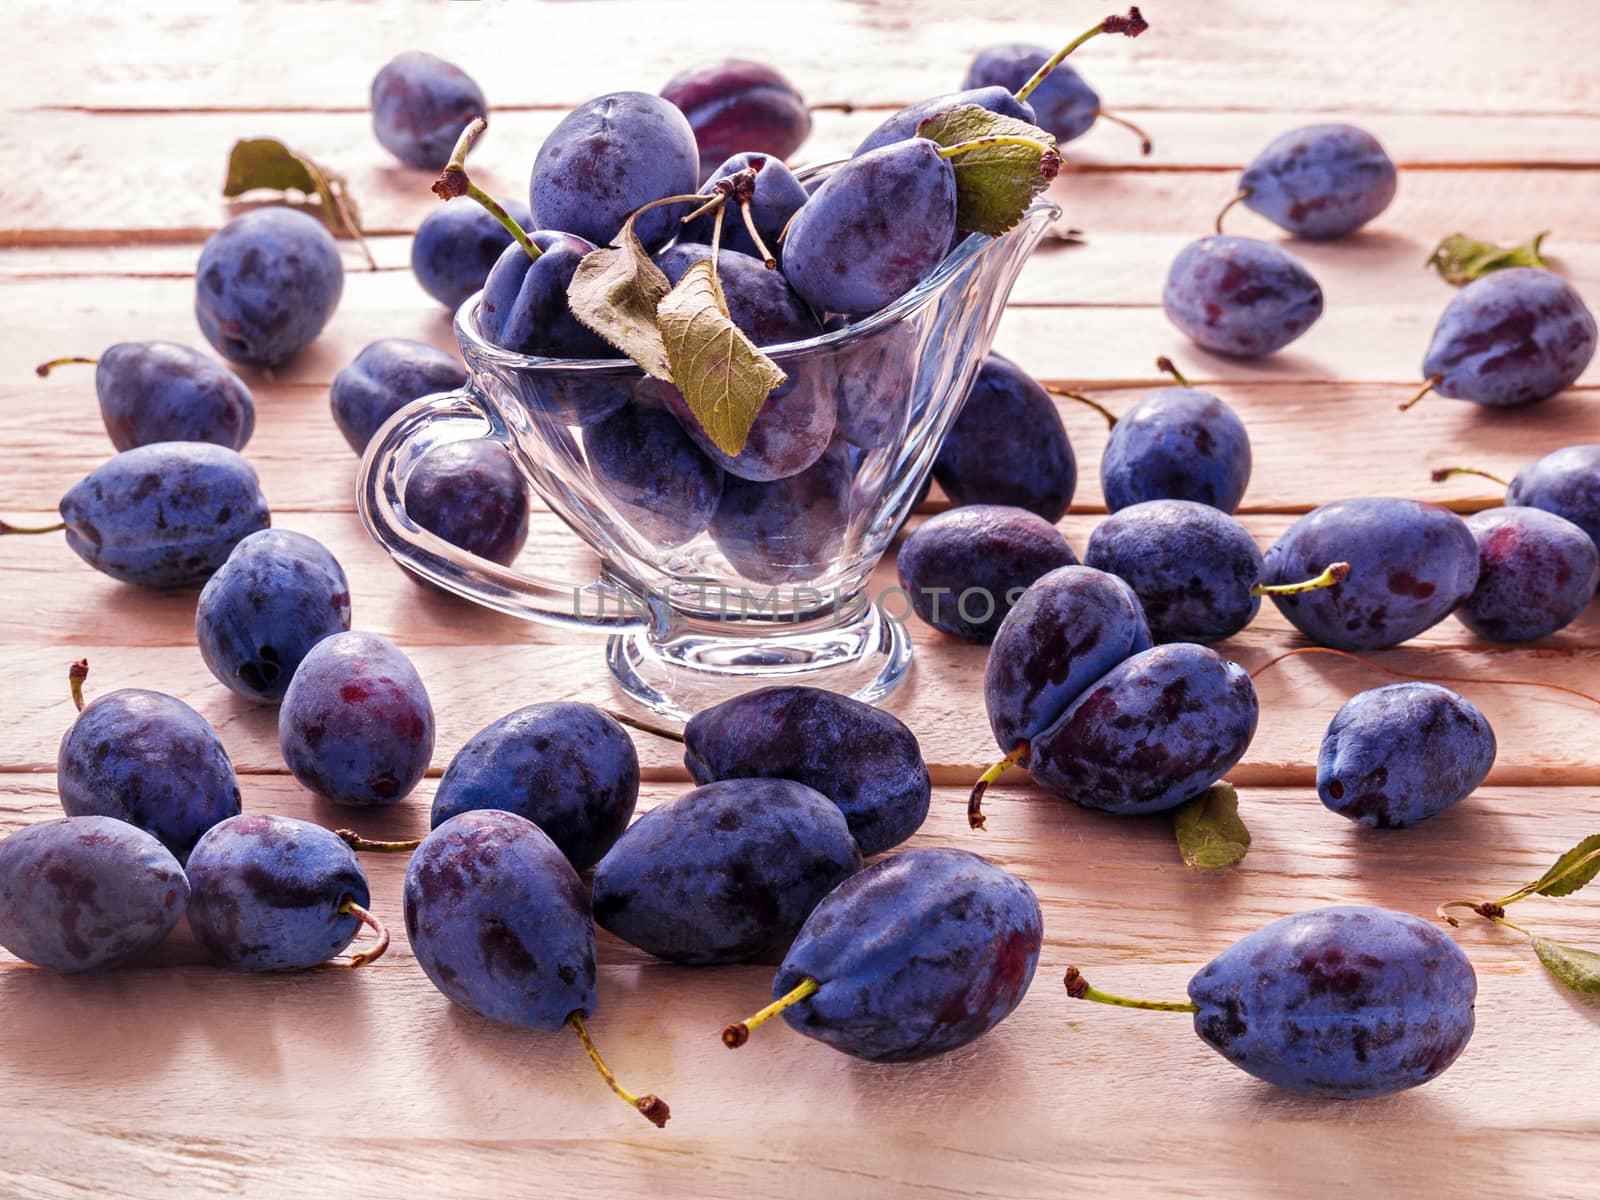 Blue large plums juicy sweet fruit for dietary nutrition lie in a glass goblet on a plank background